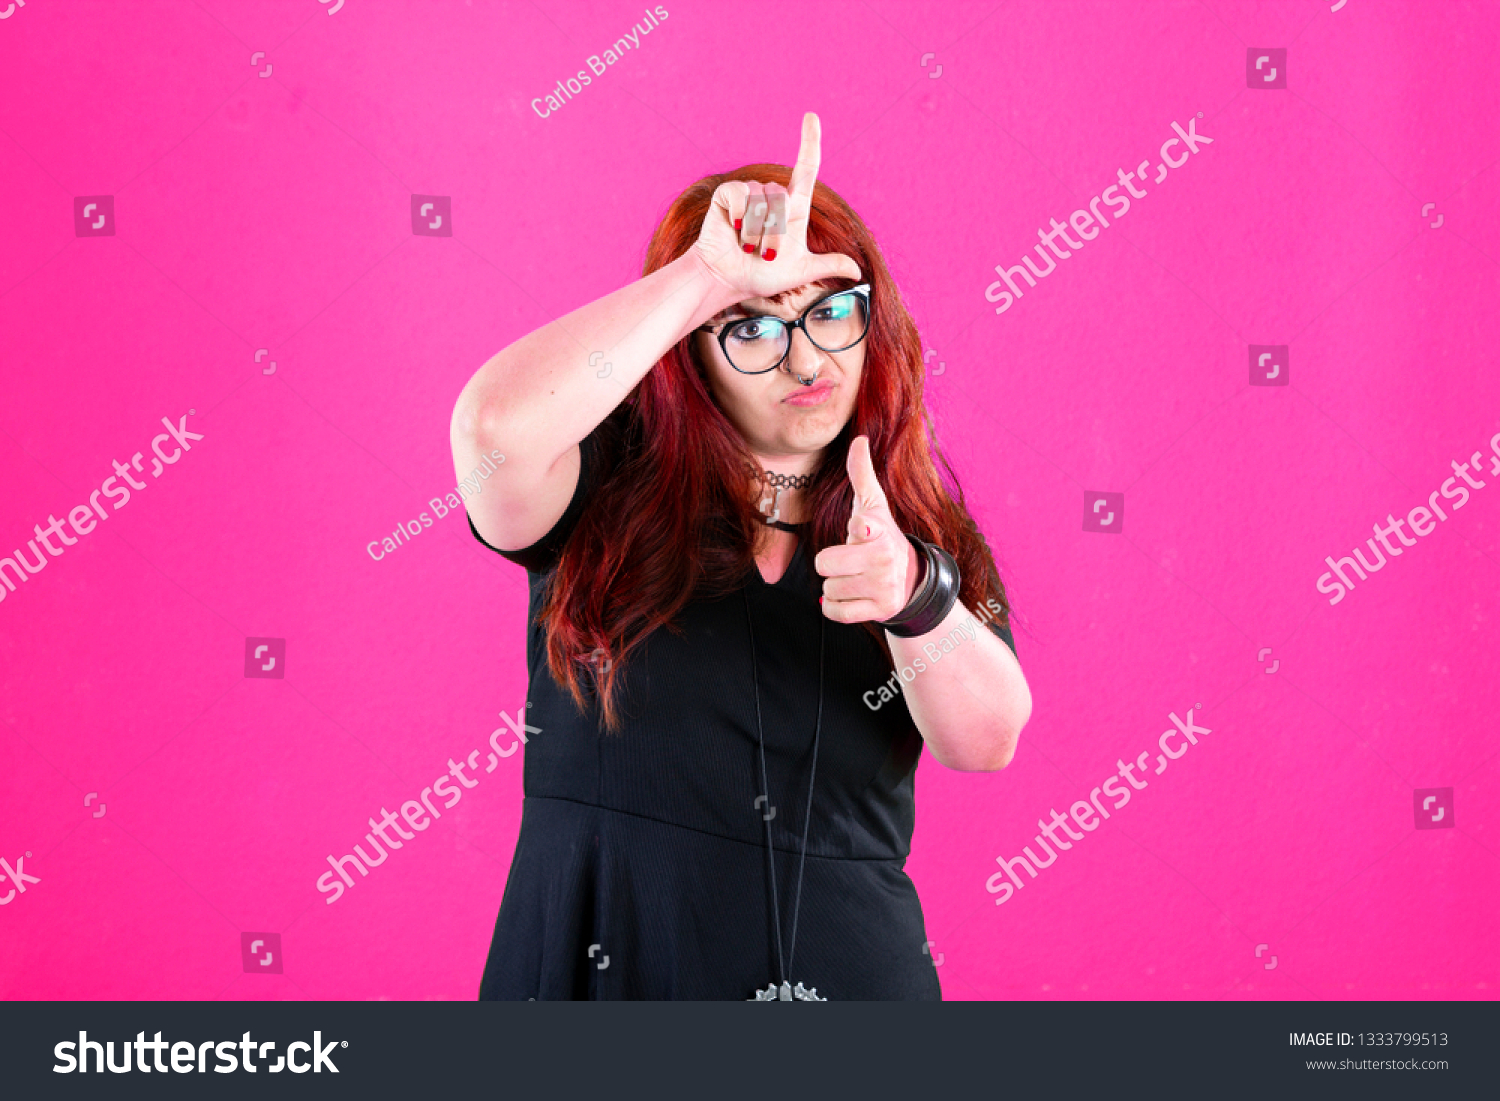 You are outsider. Studio shot of annoyed good-looking woman, feeling cool and confident while tilting head and showing loser-sign over forehead #1333799513